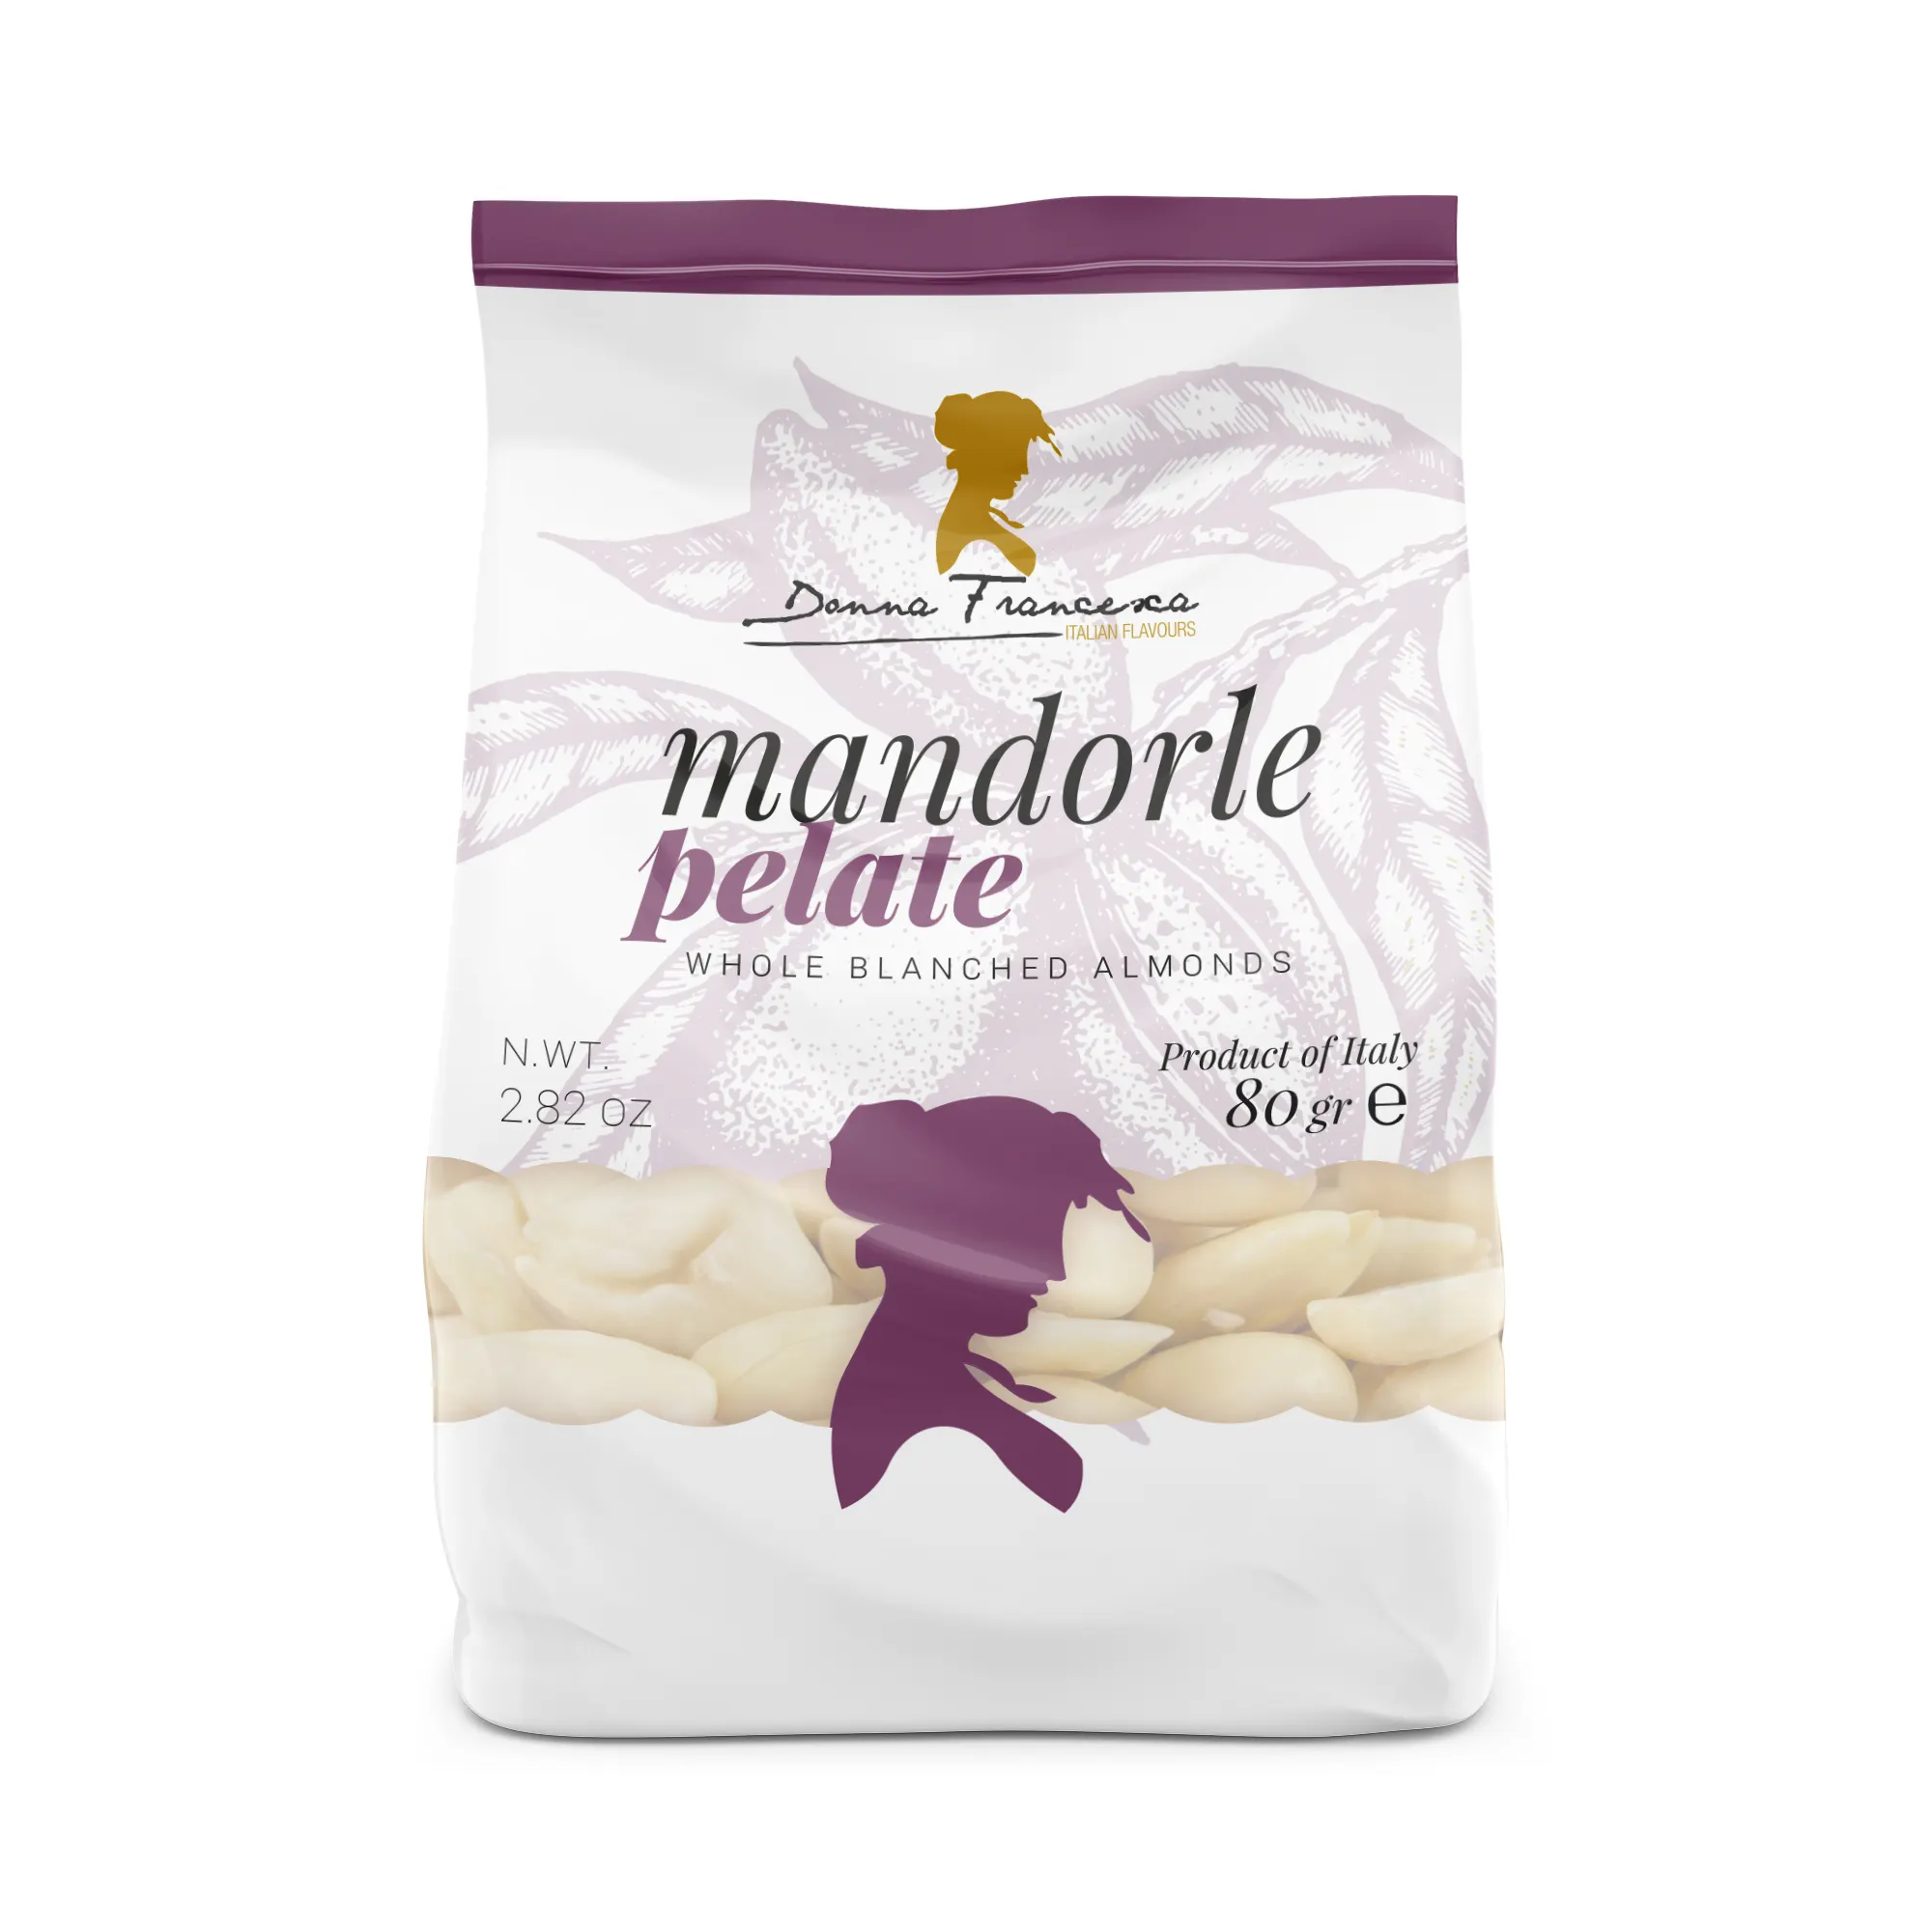 Italian Whole hand blanched almonds 80 g Premium Quality - Healthy Food - Short Supply Chain - Made in Italy